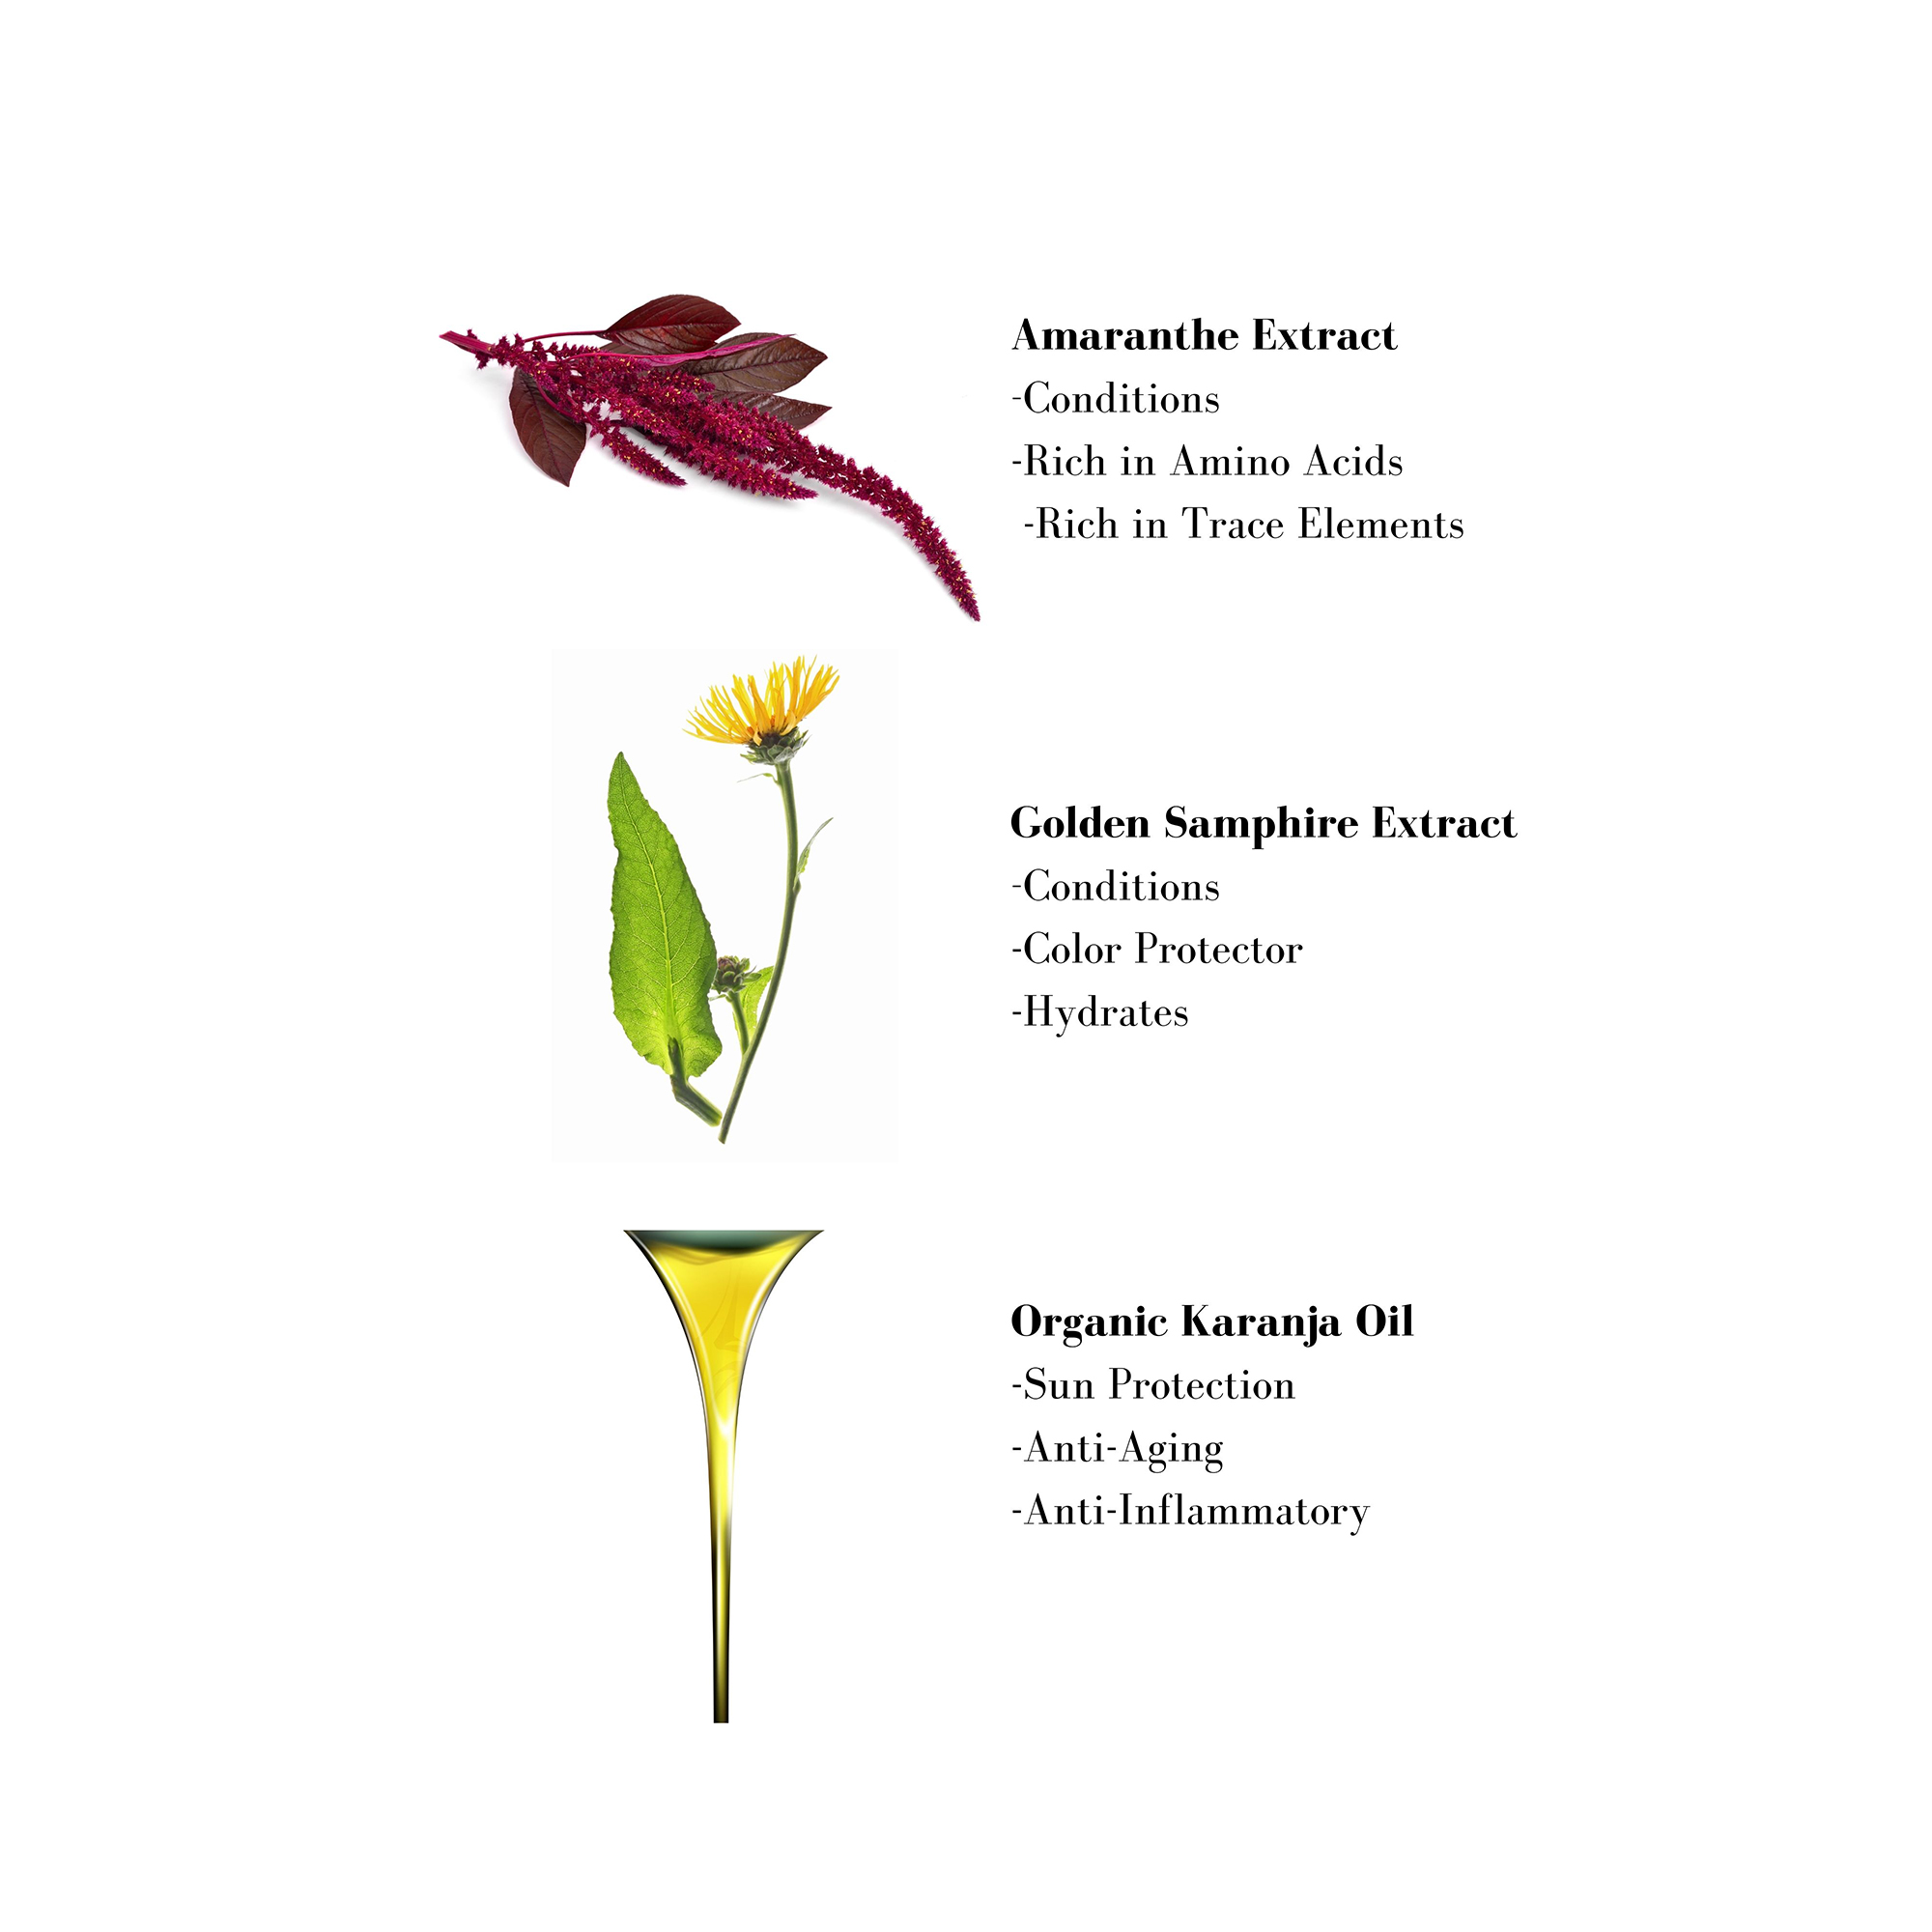 Image 1- Amaranthe Extract -Conditions -Rich in Amino Acids -Rich in Trace Elements
              Golden Samphire Extract -Conditions -Color Protector -Hydrates Organic Karanja Oil -Sun Protection -Anti-Aging -Anti-Inflammatory